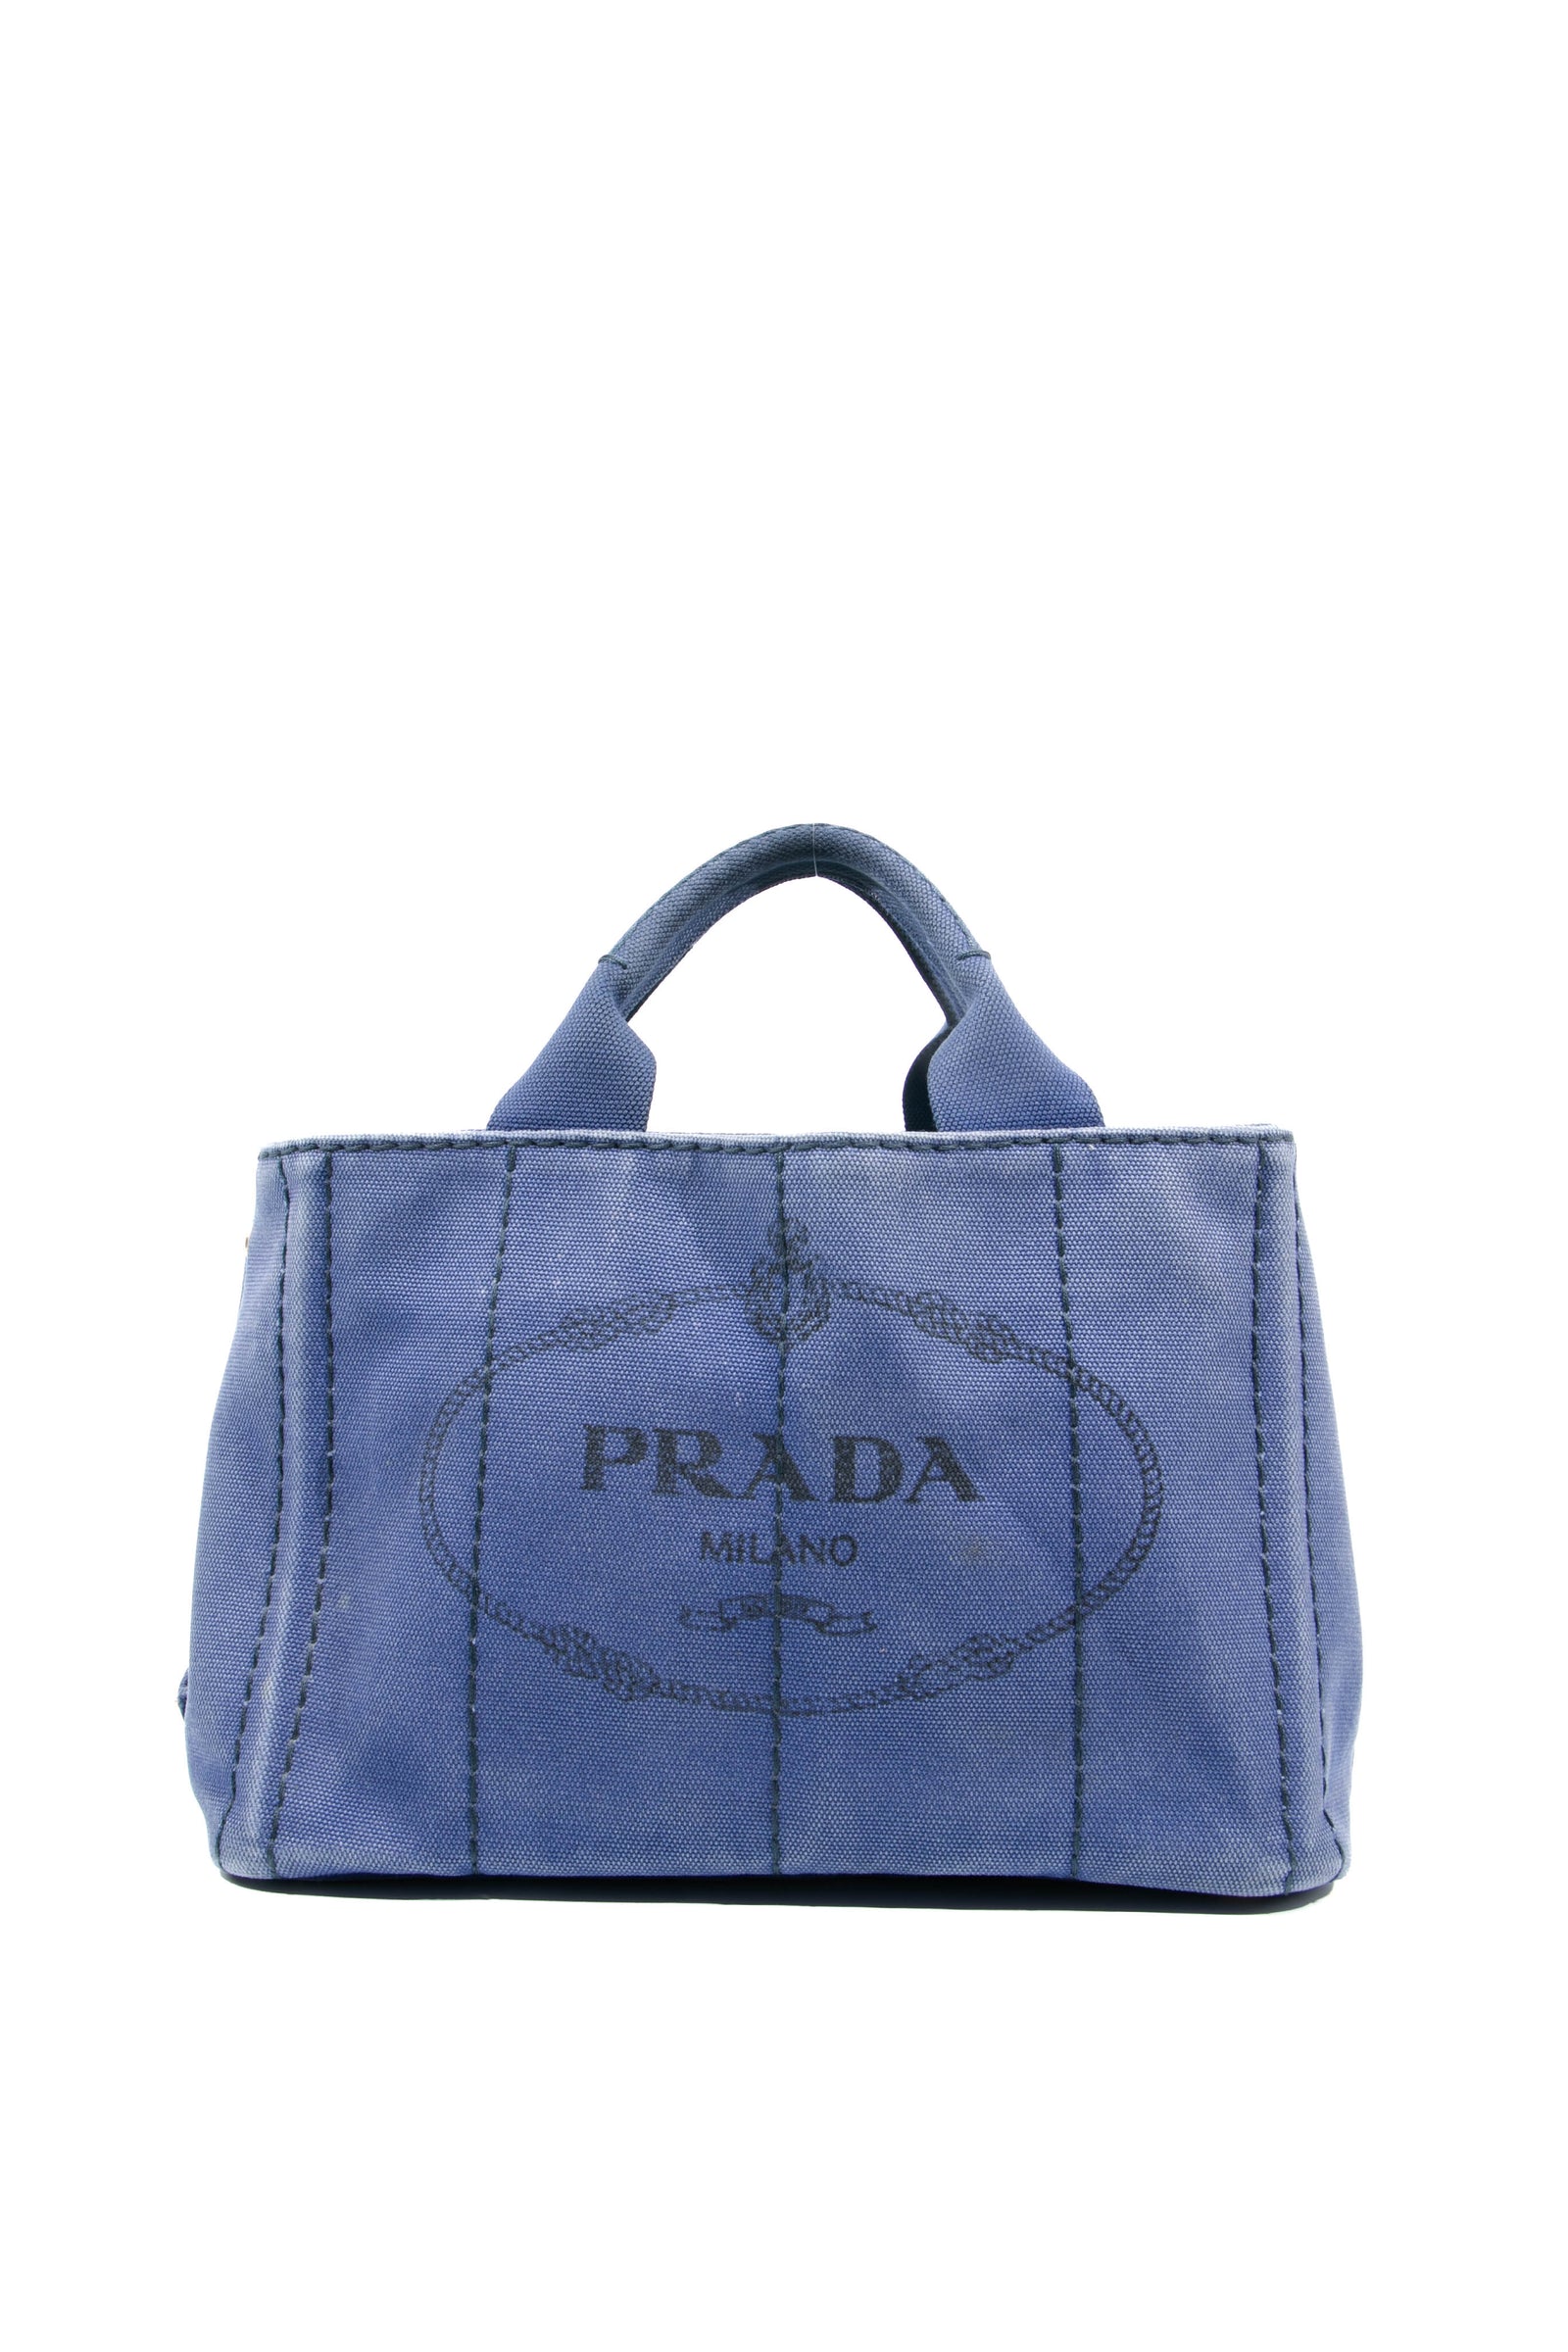 Prada Leather Strap Rectangle Tote Bag Nylon Khaki – Curated by Charbel